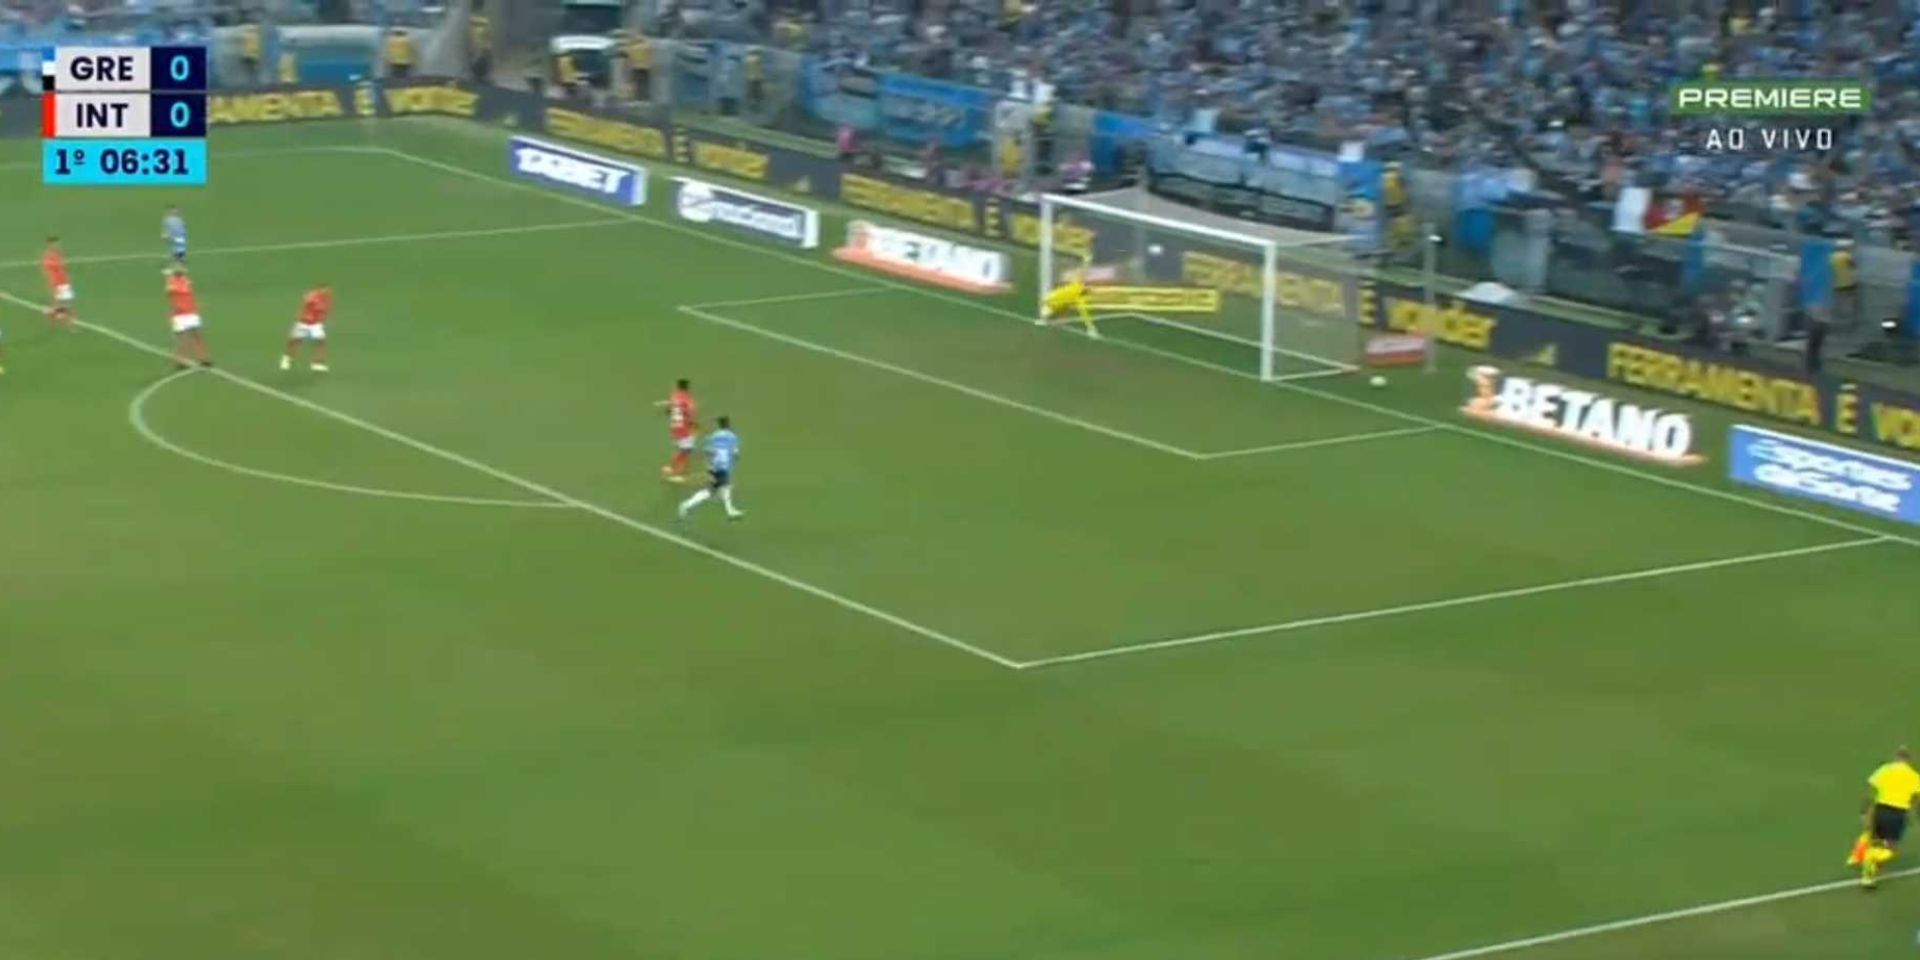 (Video) Luis Suarez rolls back the years with sublime finish for Gremio